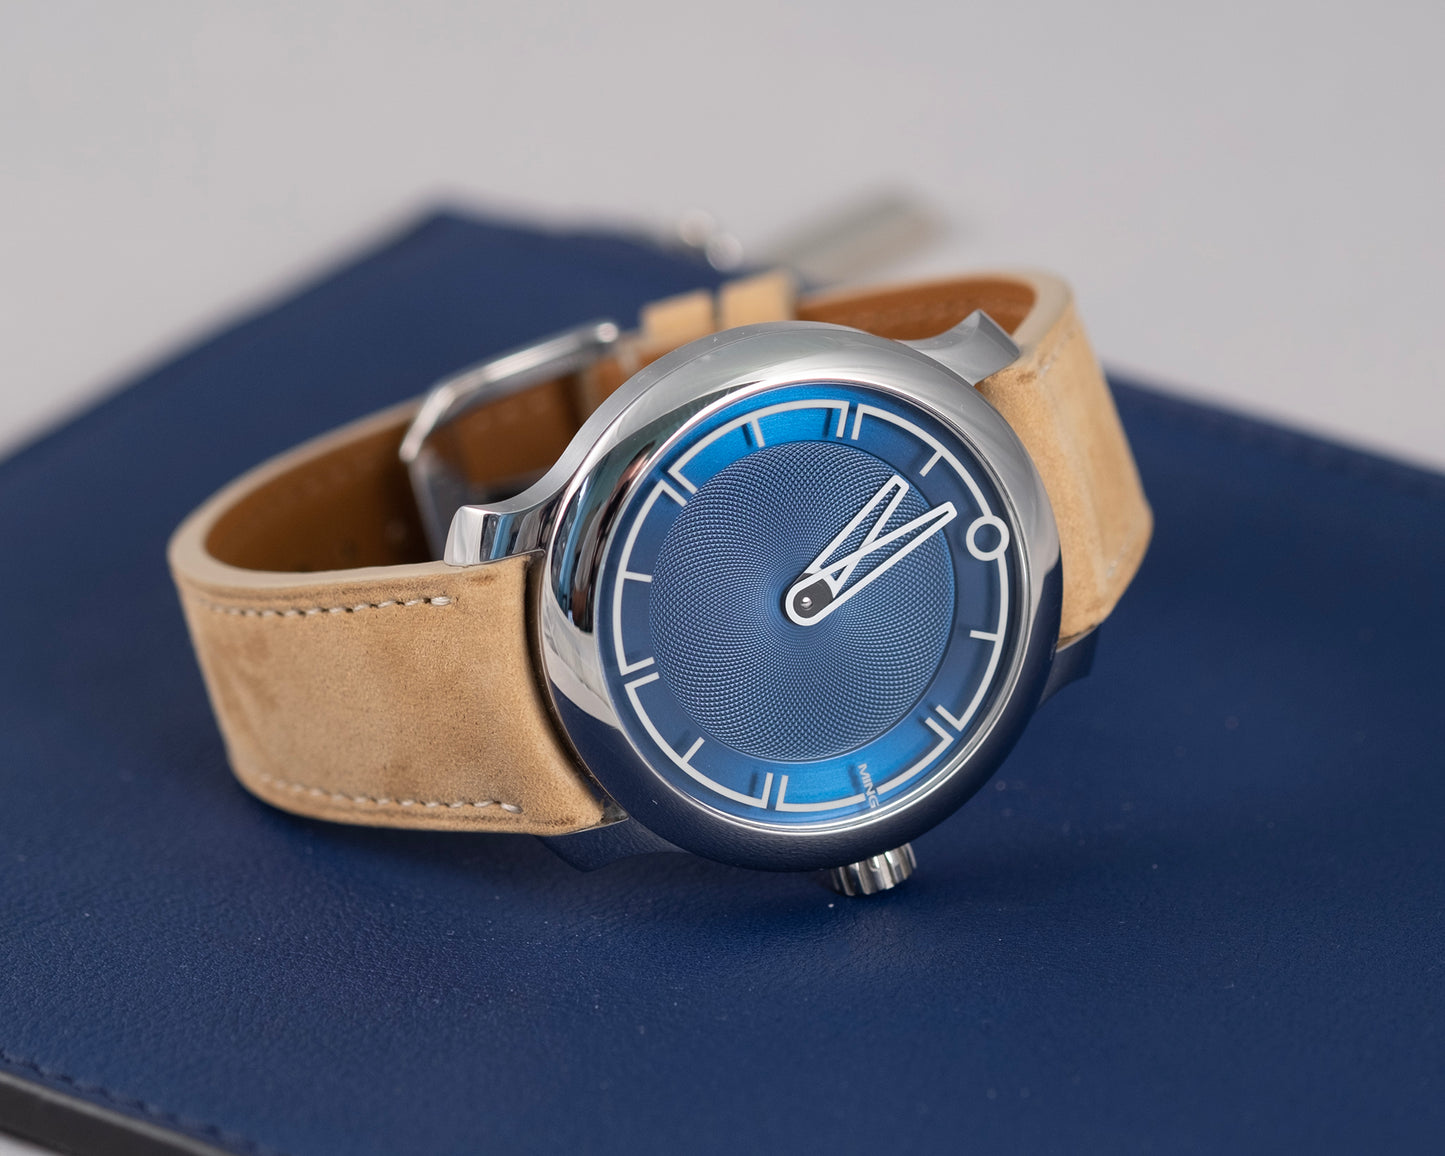 Watch Strap curved sand handles